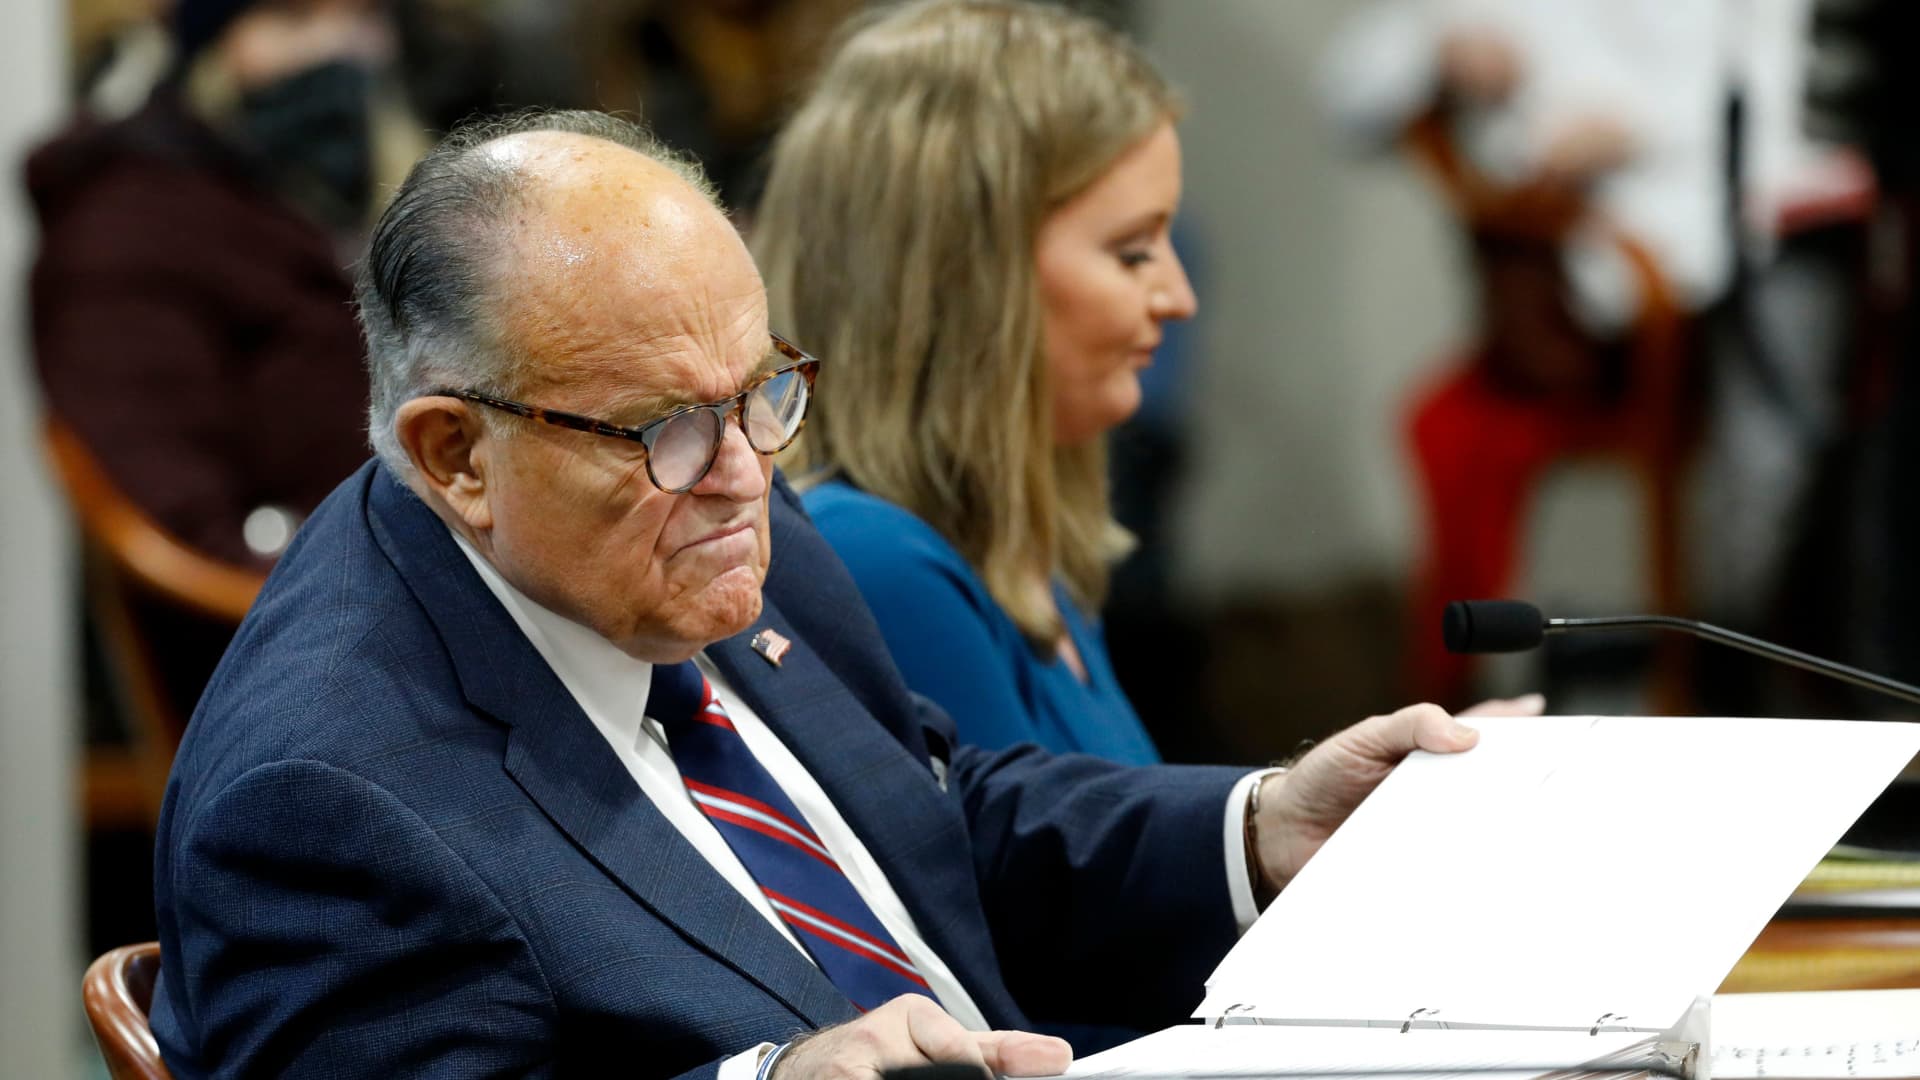 Rudy Giuliani, personal lawyer of US President Donald Trump, looks at documents as he appears before the Michigan House Oversight Committee in Lansing, Michigan on December 2, 2020.